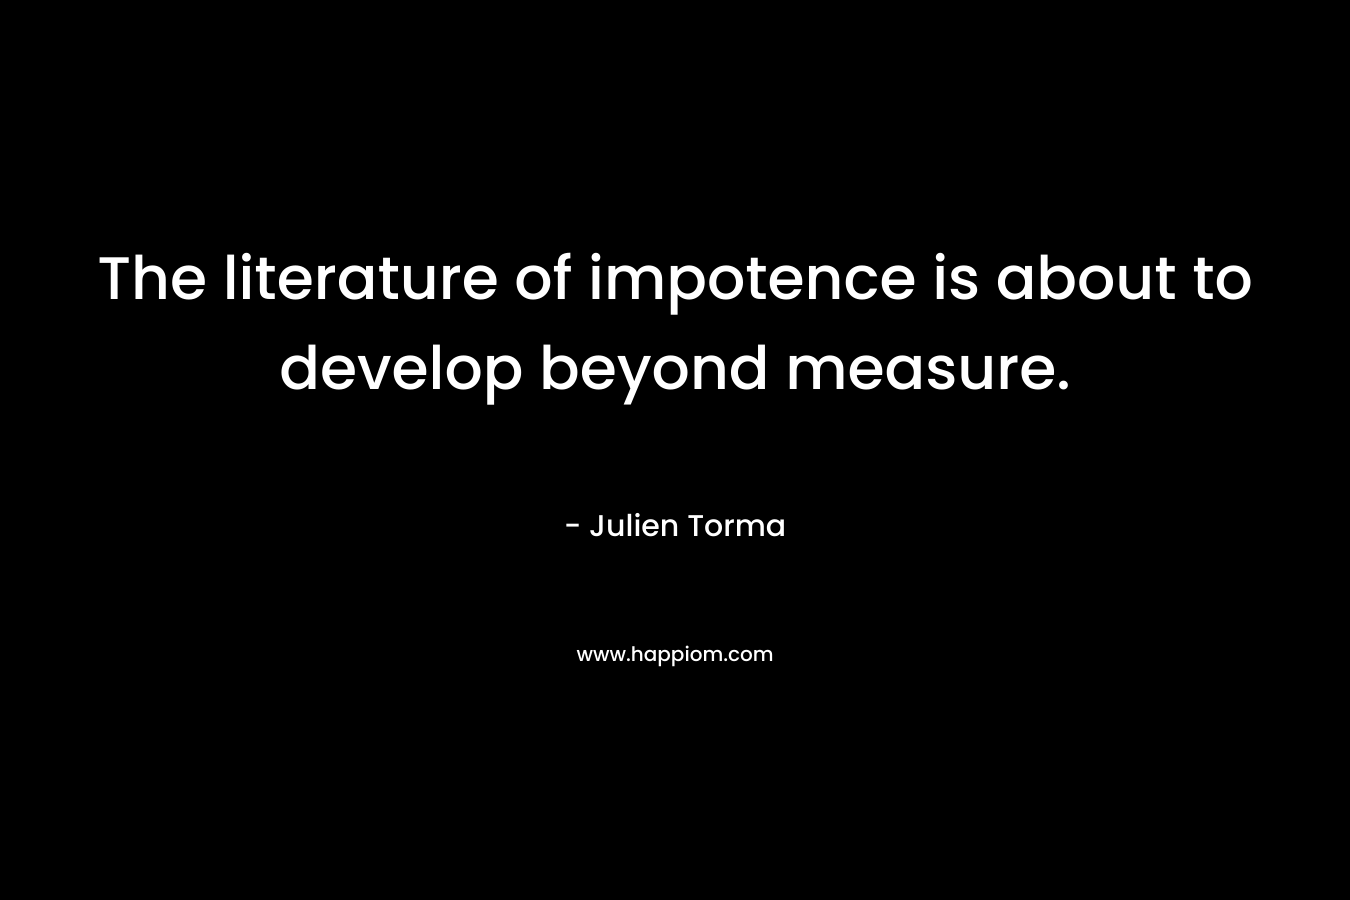 The literature of impotence is about to develop beyond measure. – Julien Torma